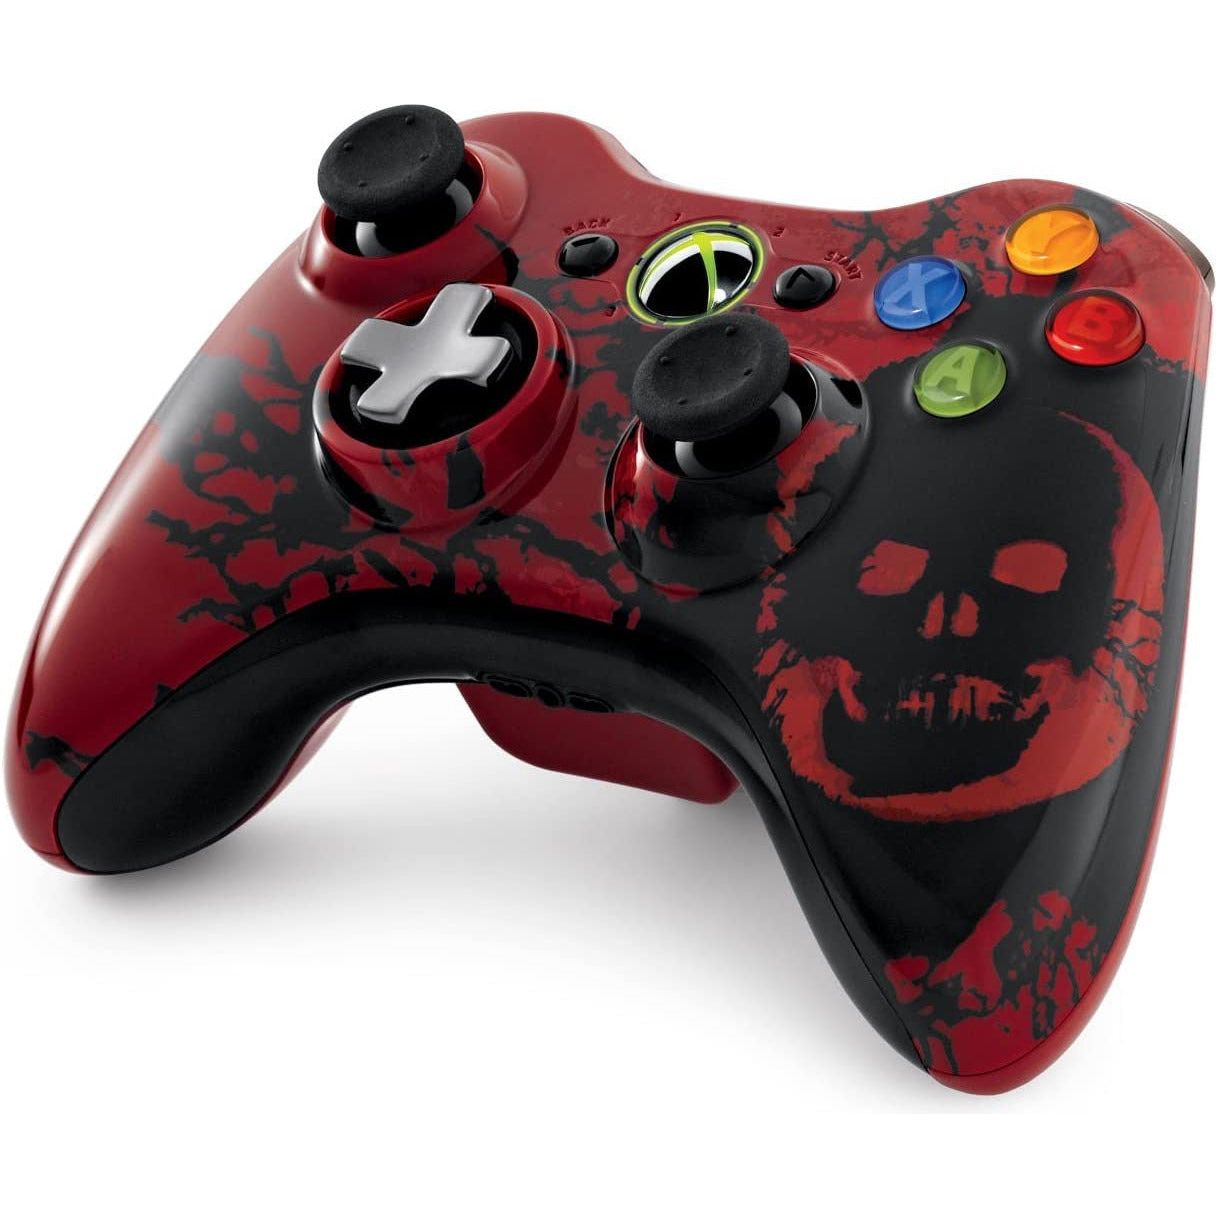 Official XBOX 360 Wireless Controller - Gears of War 3 Limited Edition